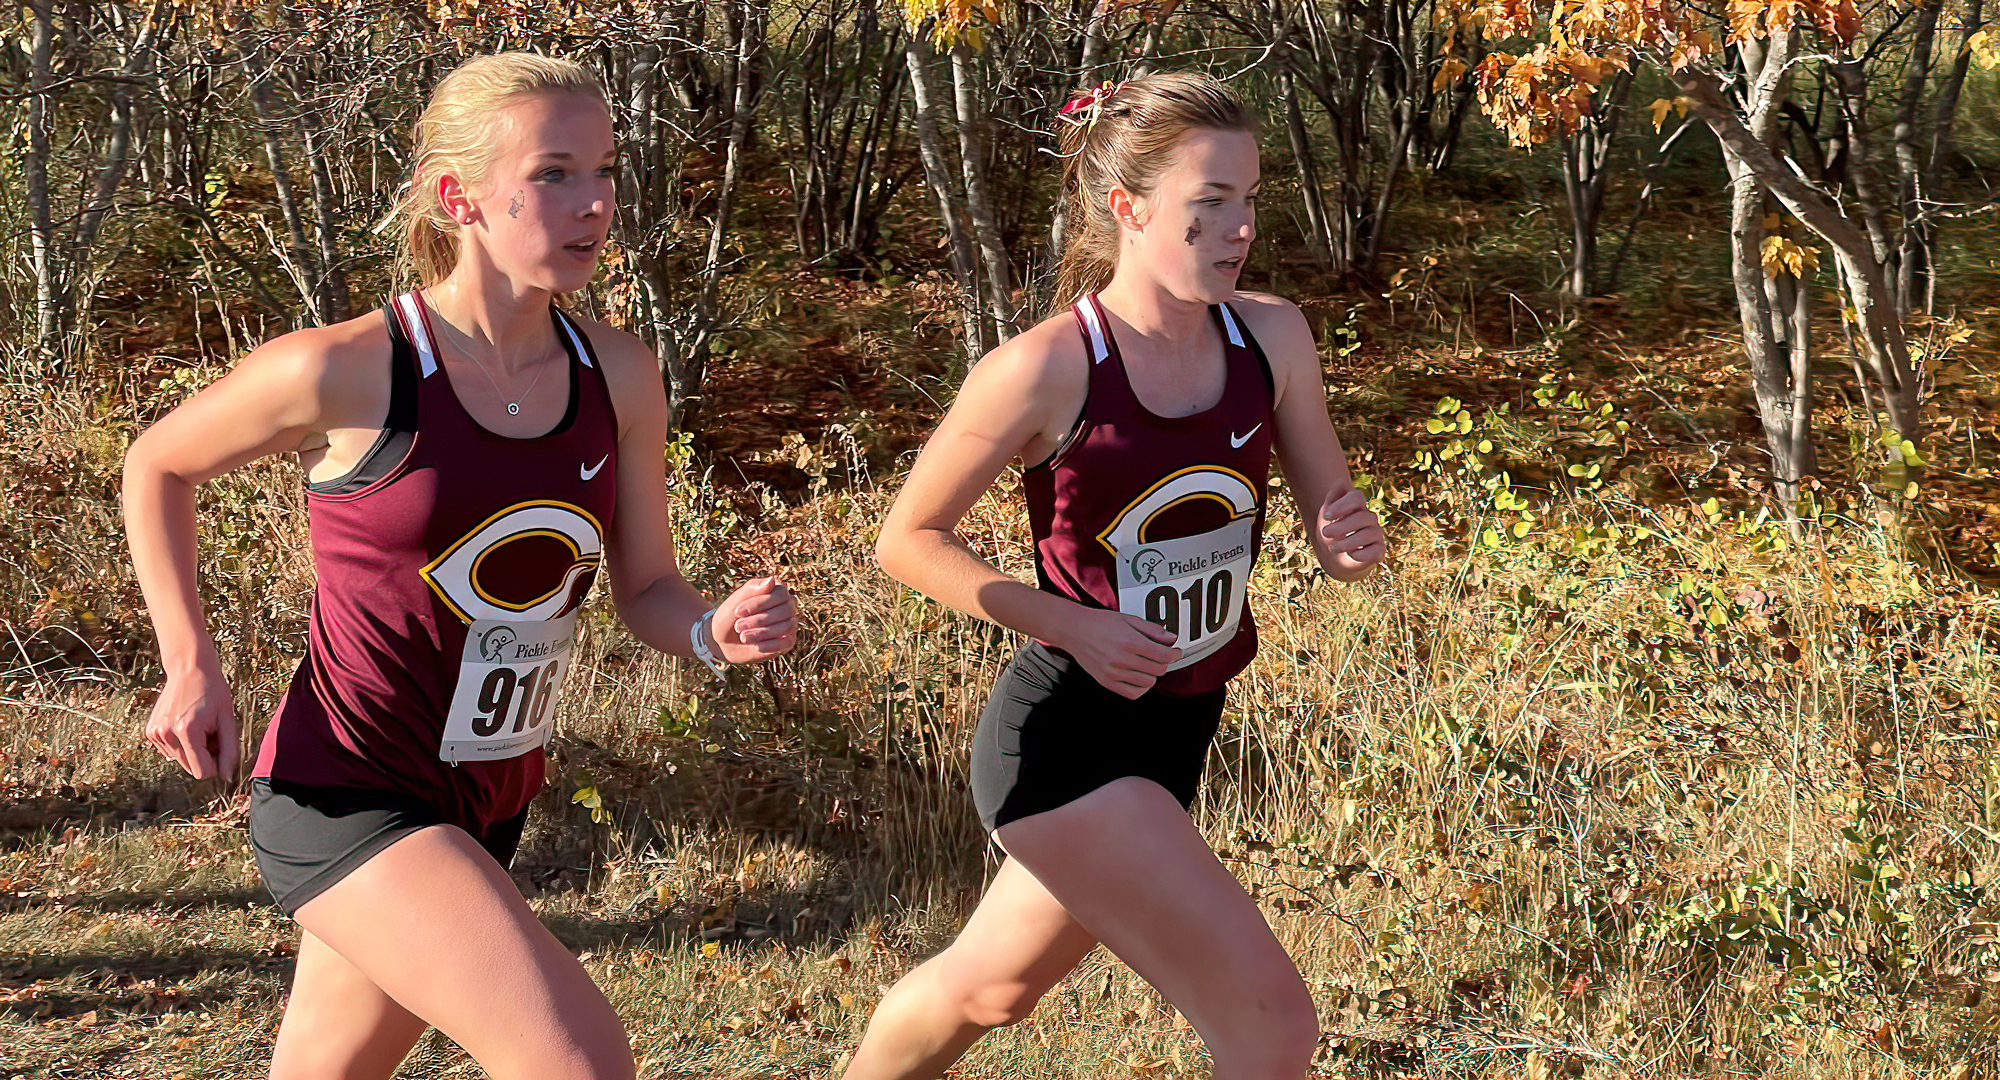 Amelia Landsverk (R) and Emily Rugloski race together at the Jimmie Invitational. Landsverk led the Cobbers with a a time of 19:54.3